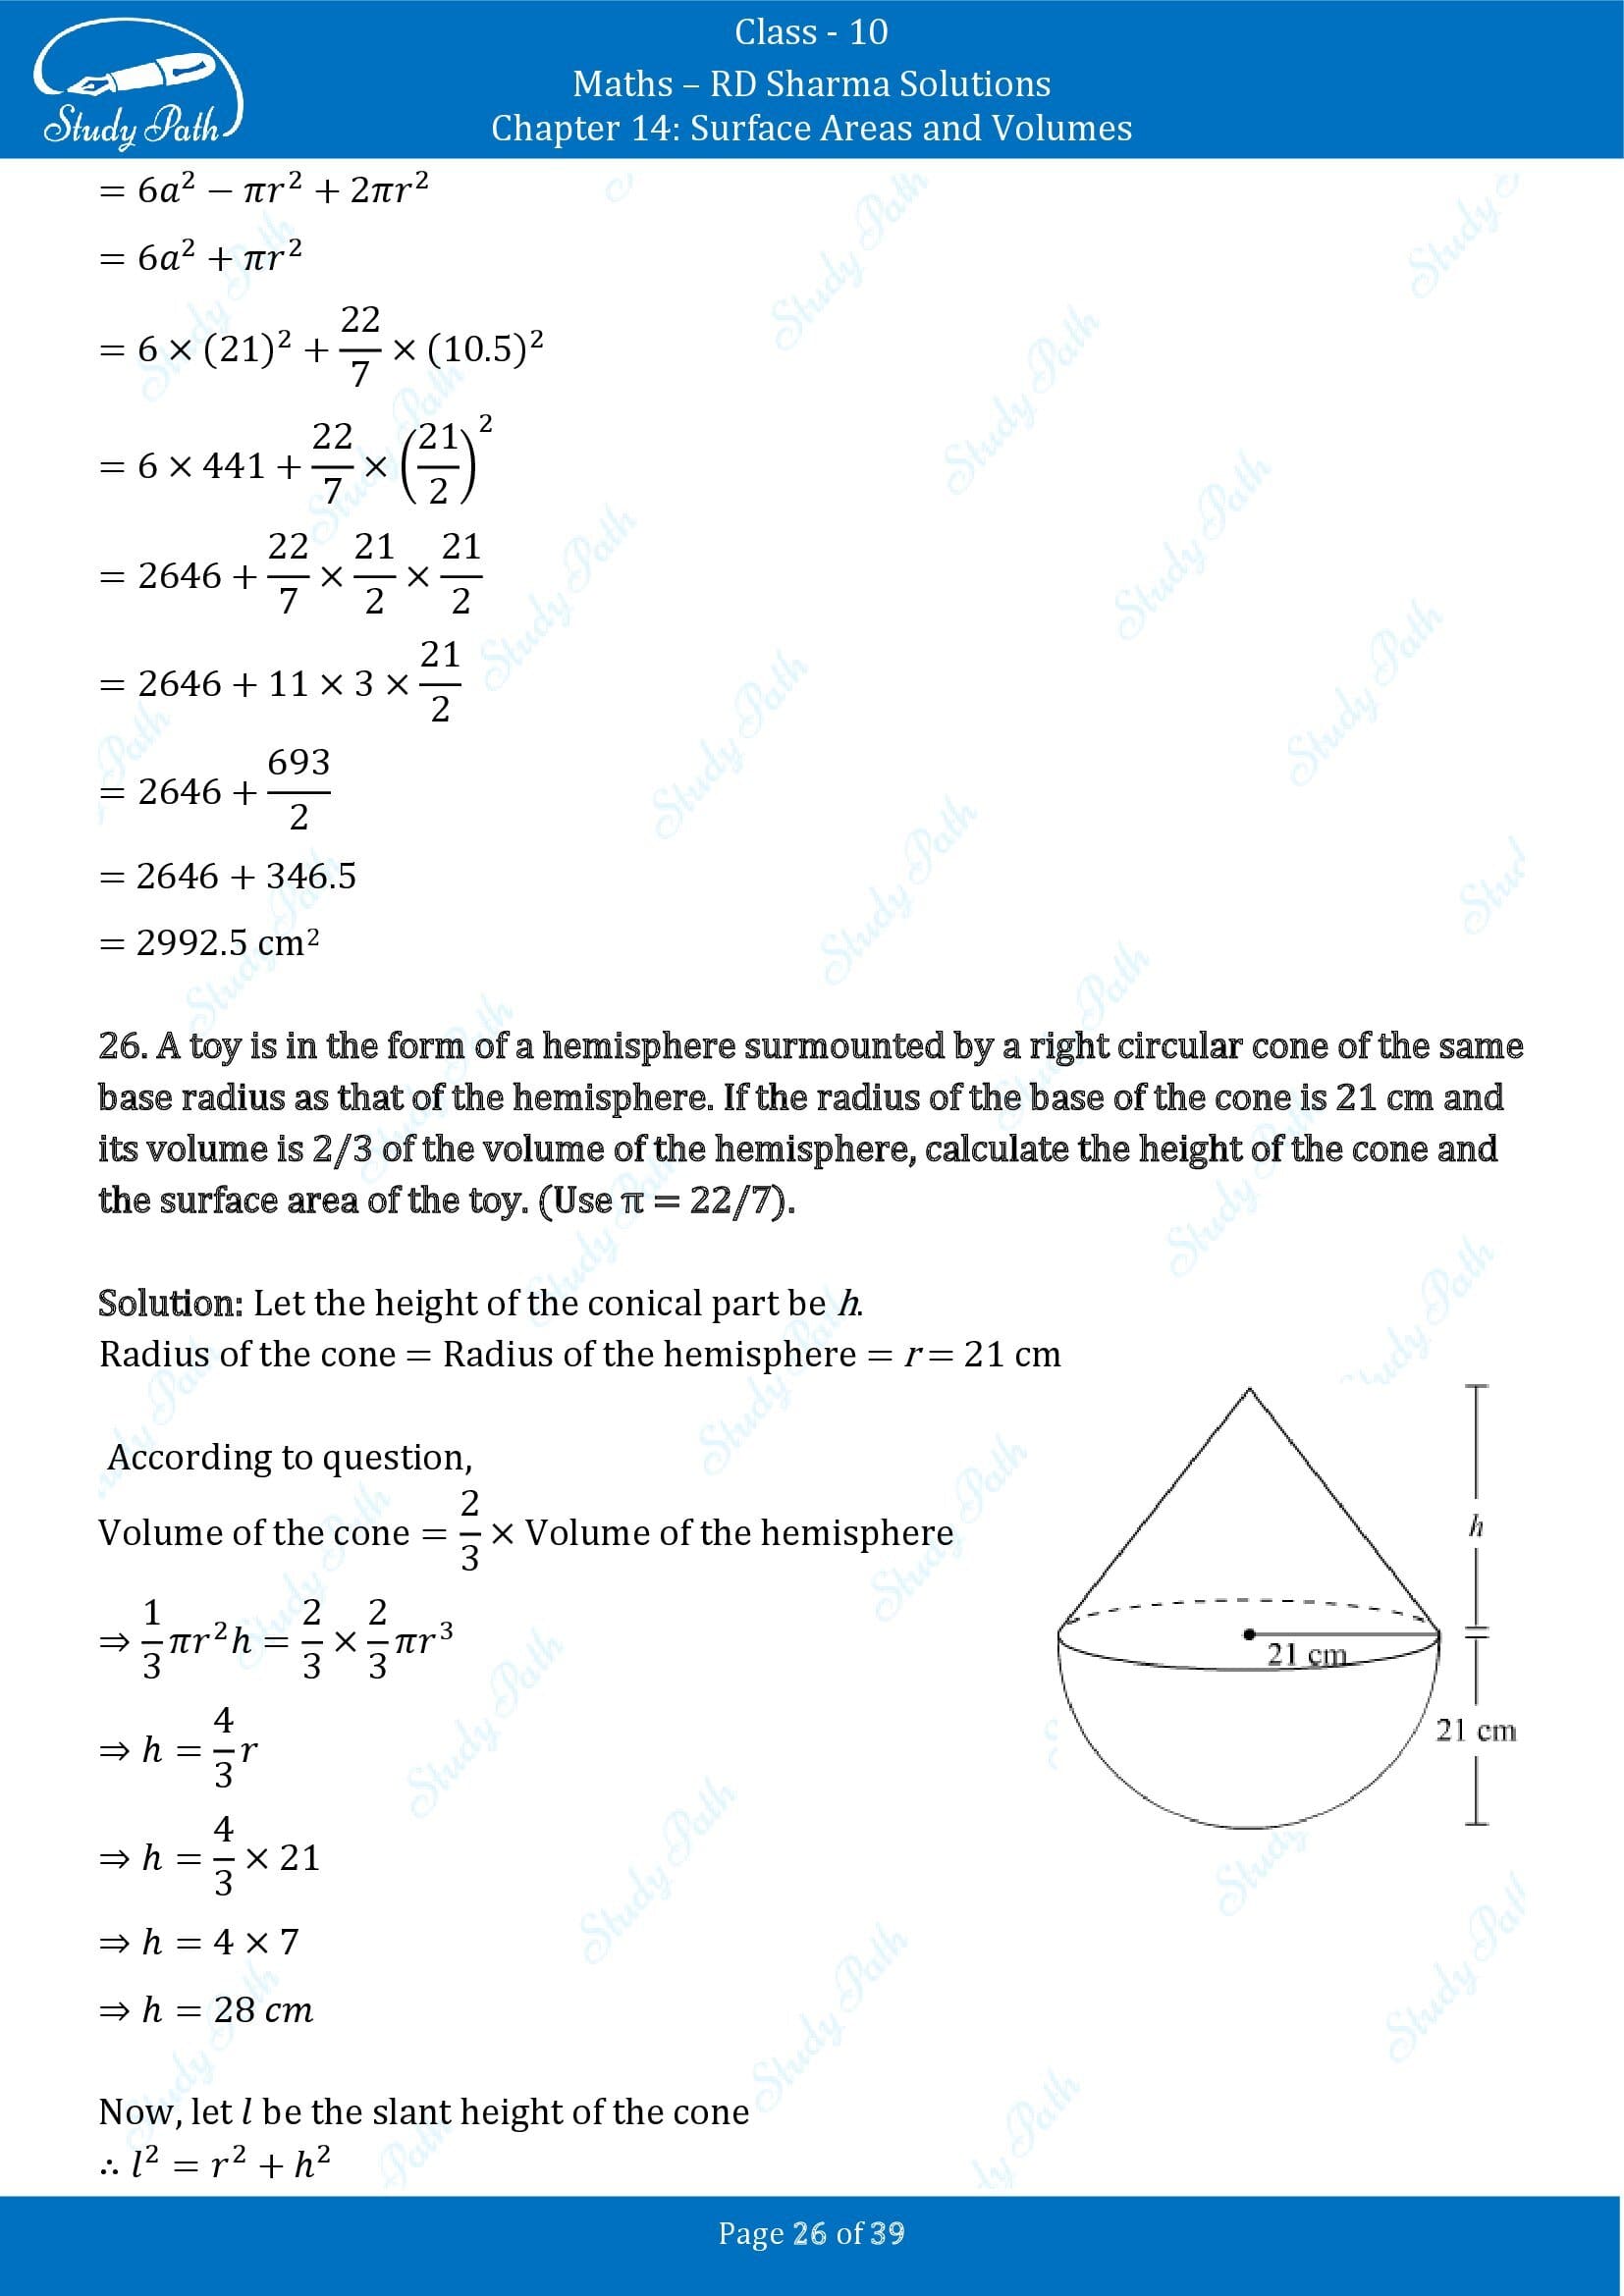 RD Sharma Solutions Class 10 Chapter 14 Surface Areas and Volumes Exercise 14.2 00026